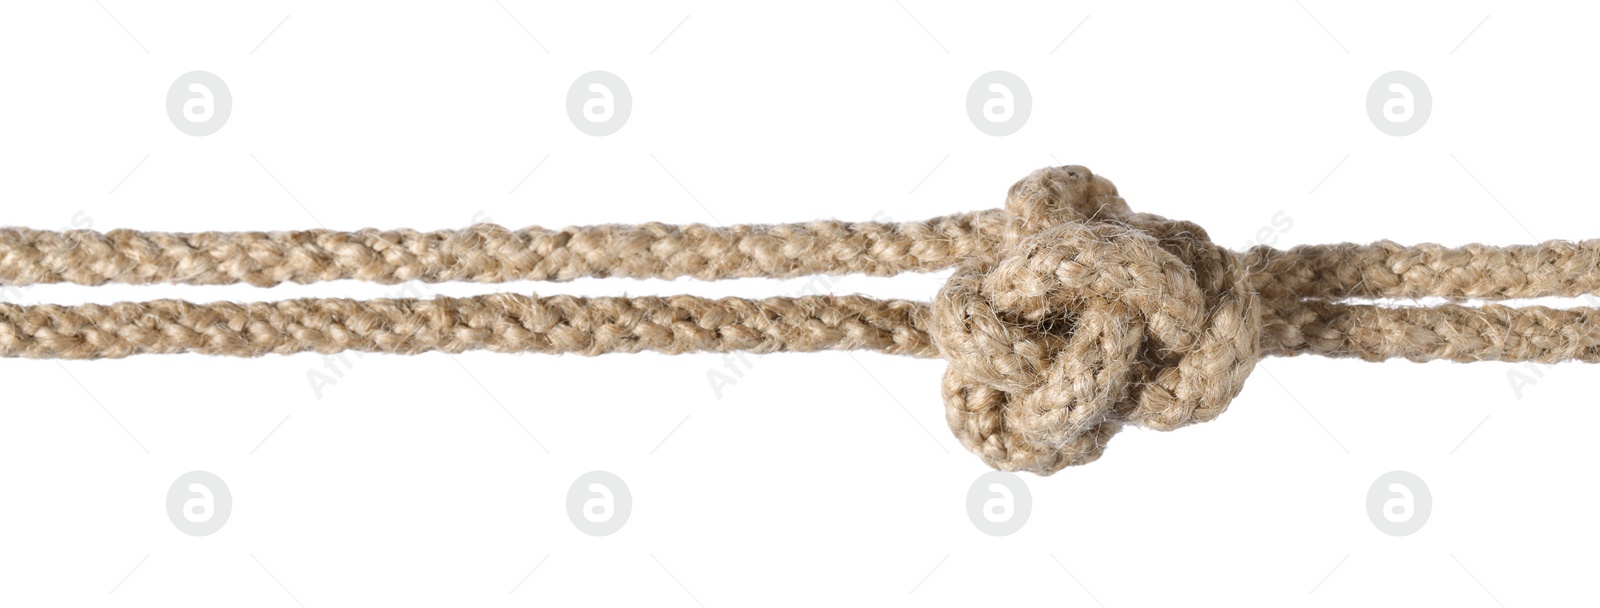 Photo of Hemp ropes with knot isolated on white